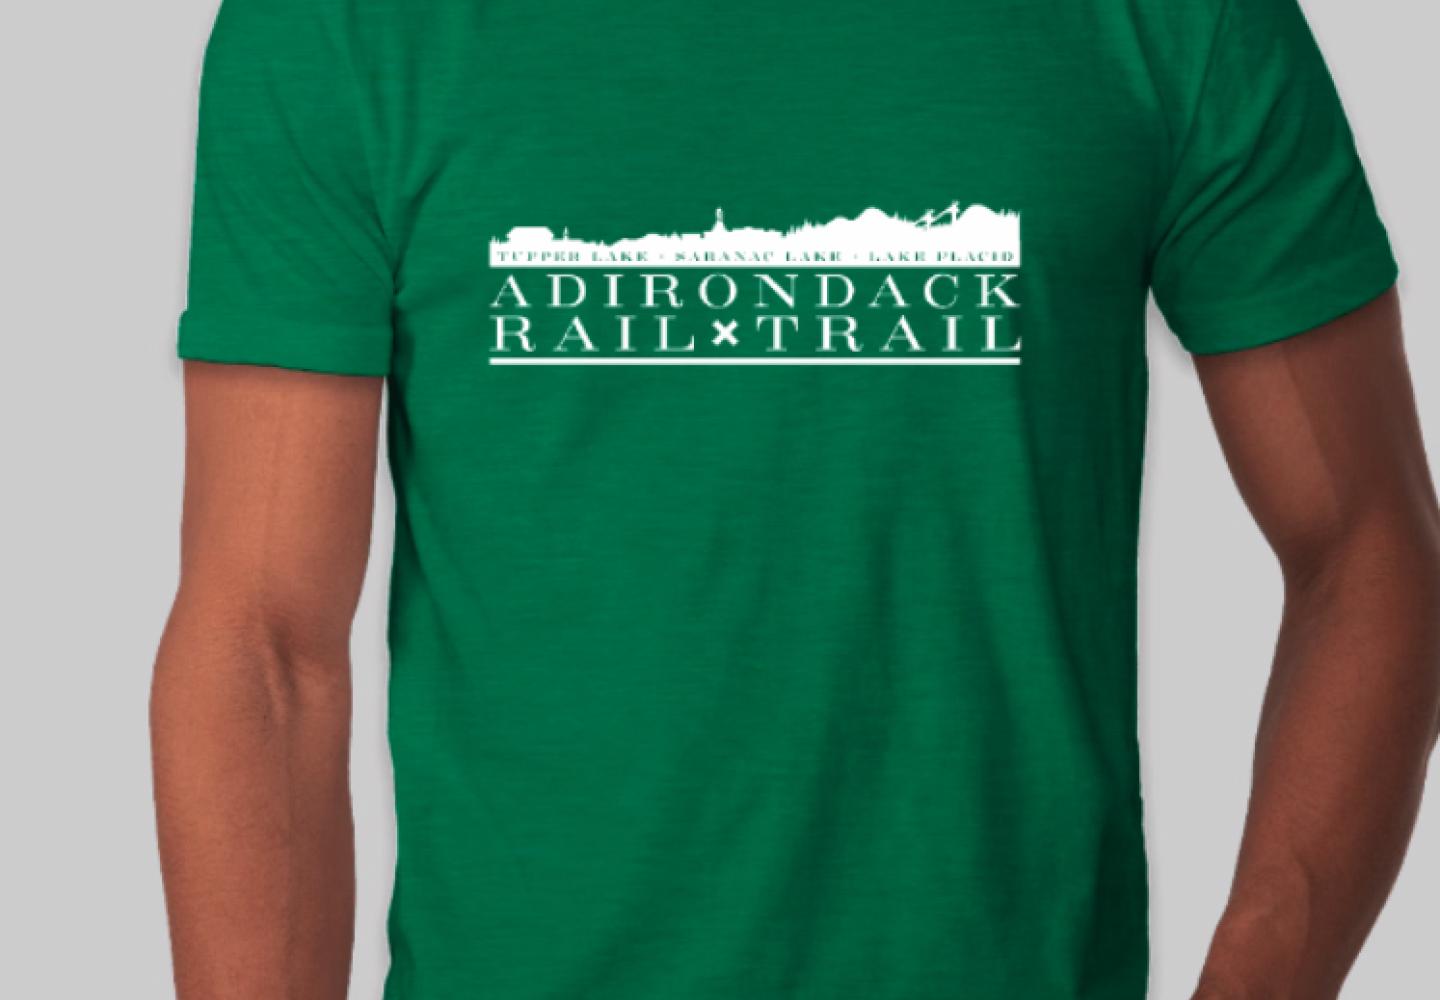 Sales of the Adirondack Rail Trail t-shirt supports youth cycling in the Adirondacks.